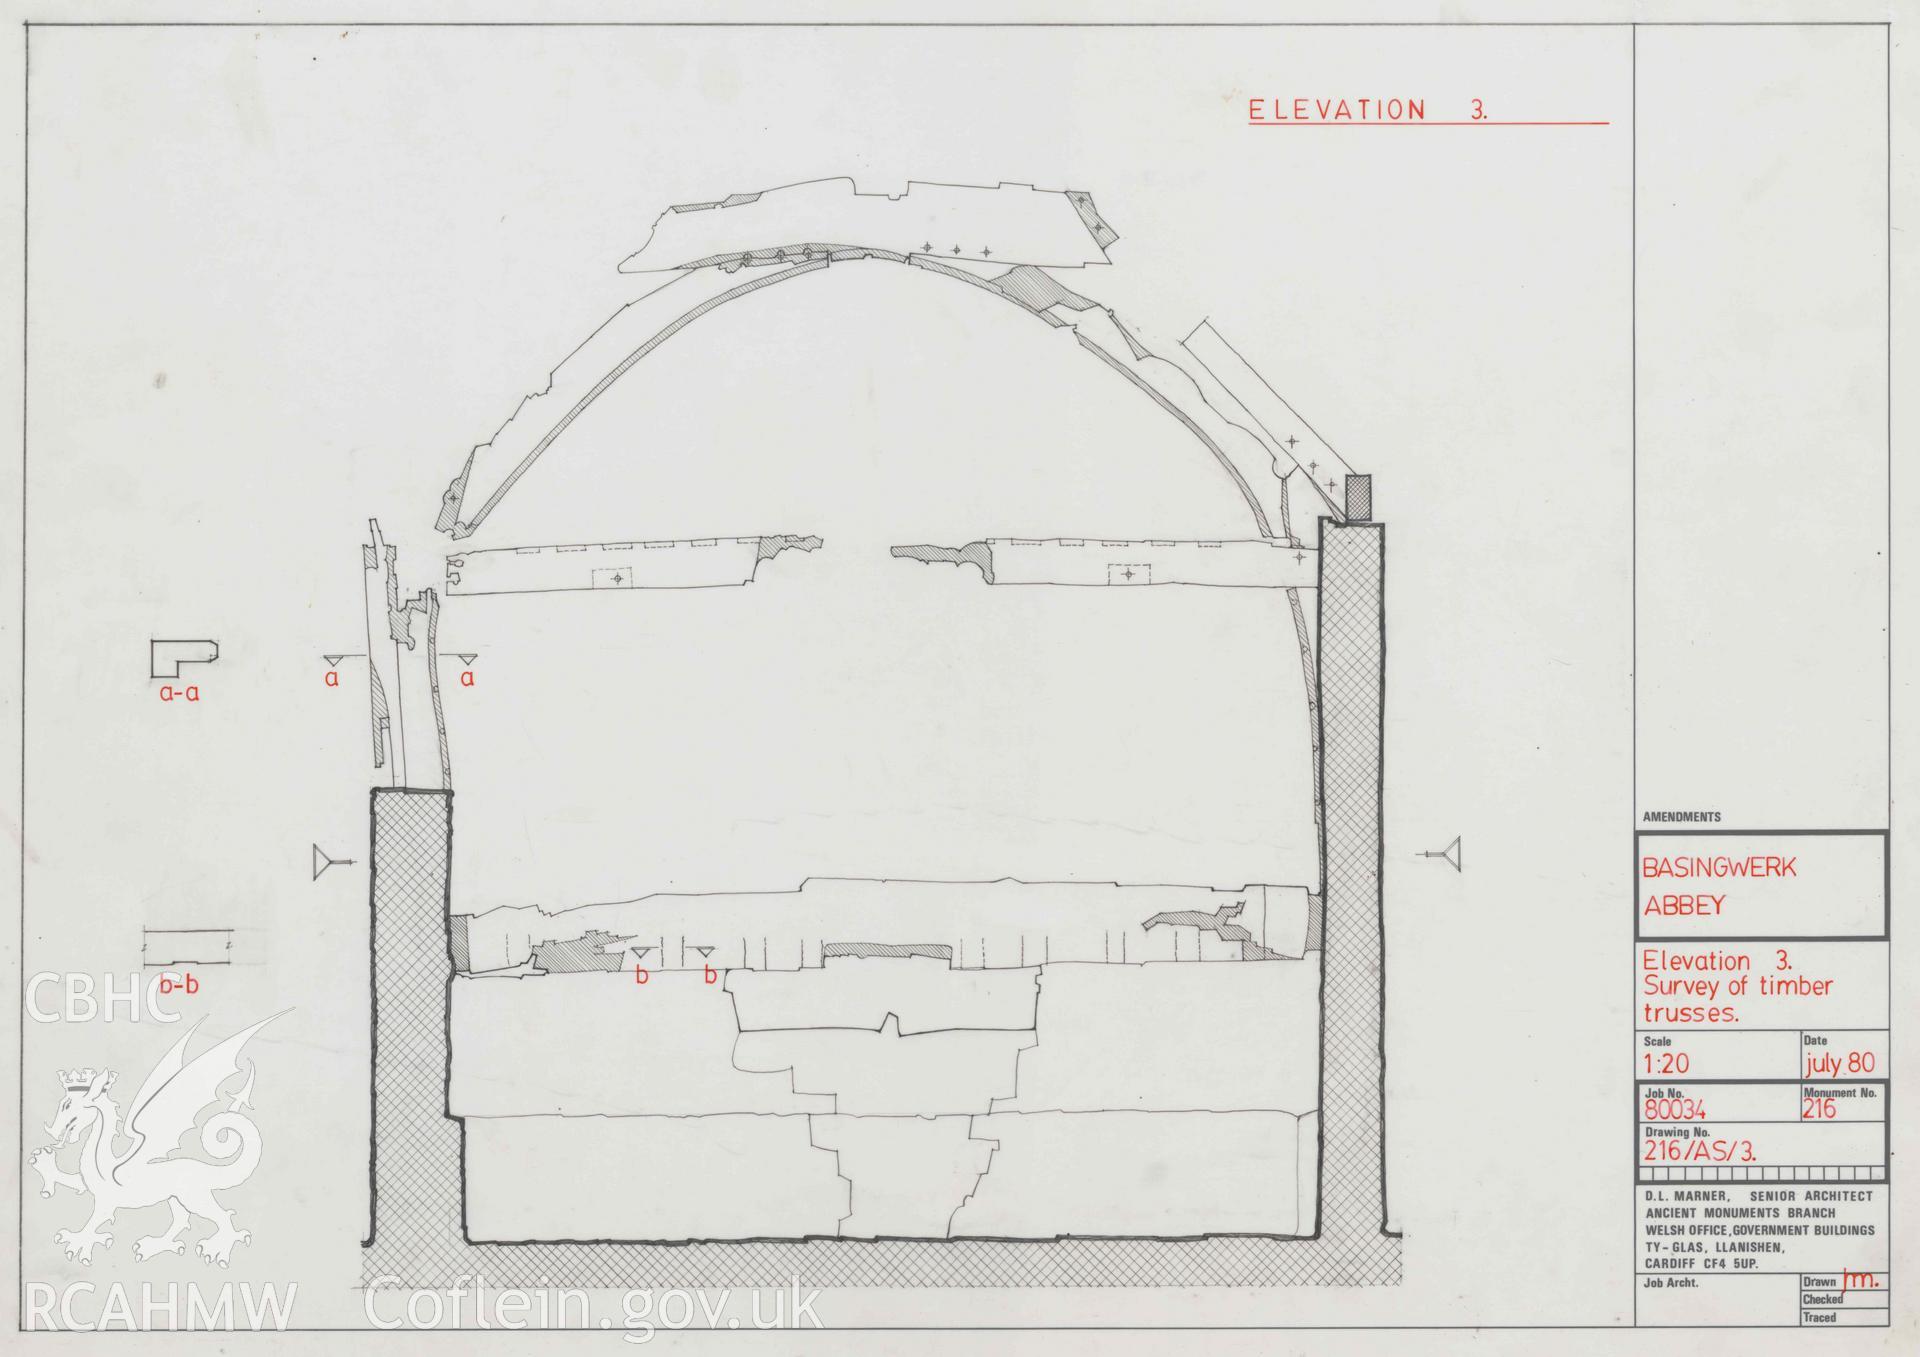 Cadw guardianship monument drawing of Basingwerk Abbey. Outer SE range, truss section - annotated. Digitised copy of original awaiting transfer from Cadw.